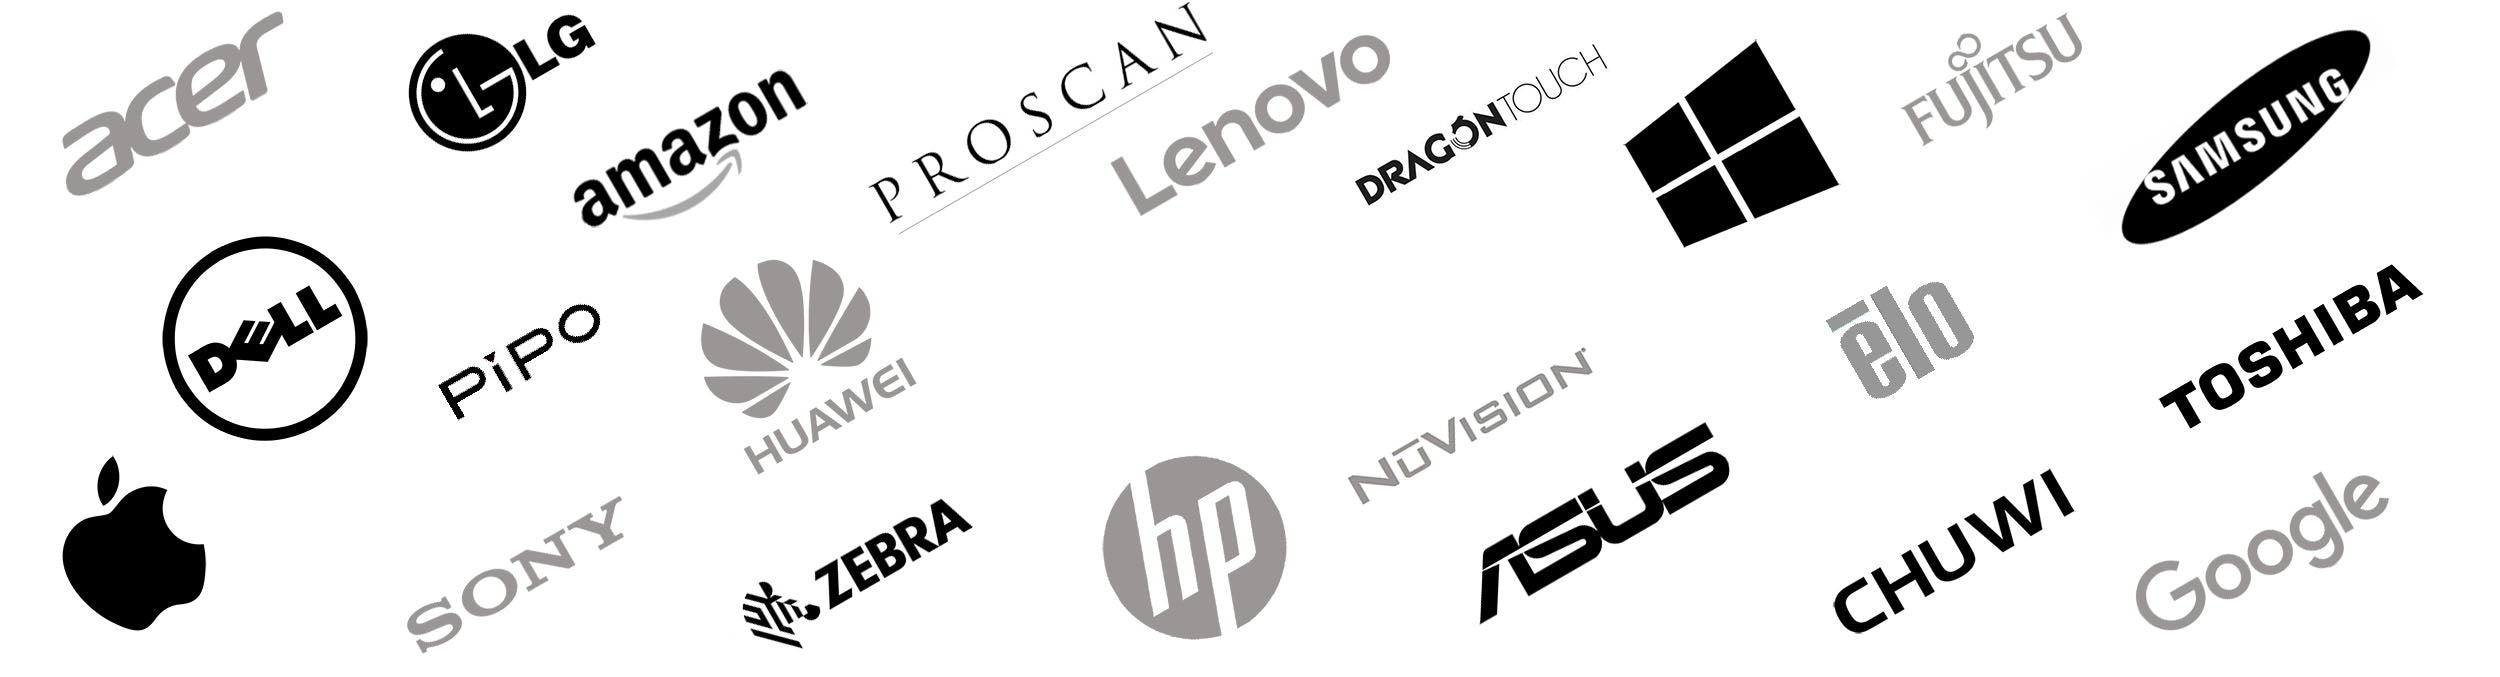 Brand names we support at Armodilo